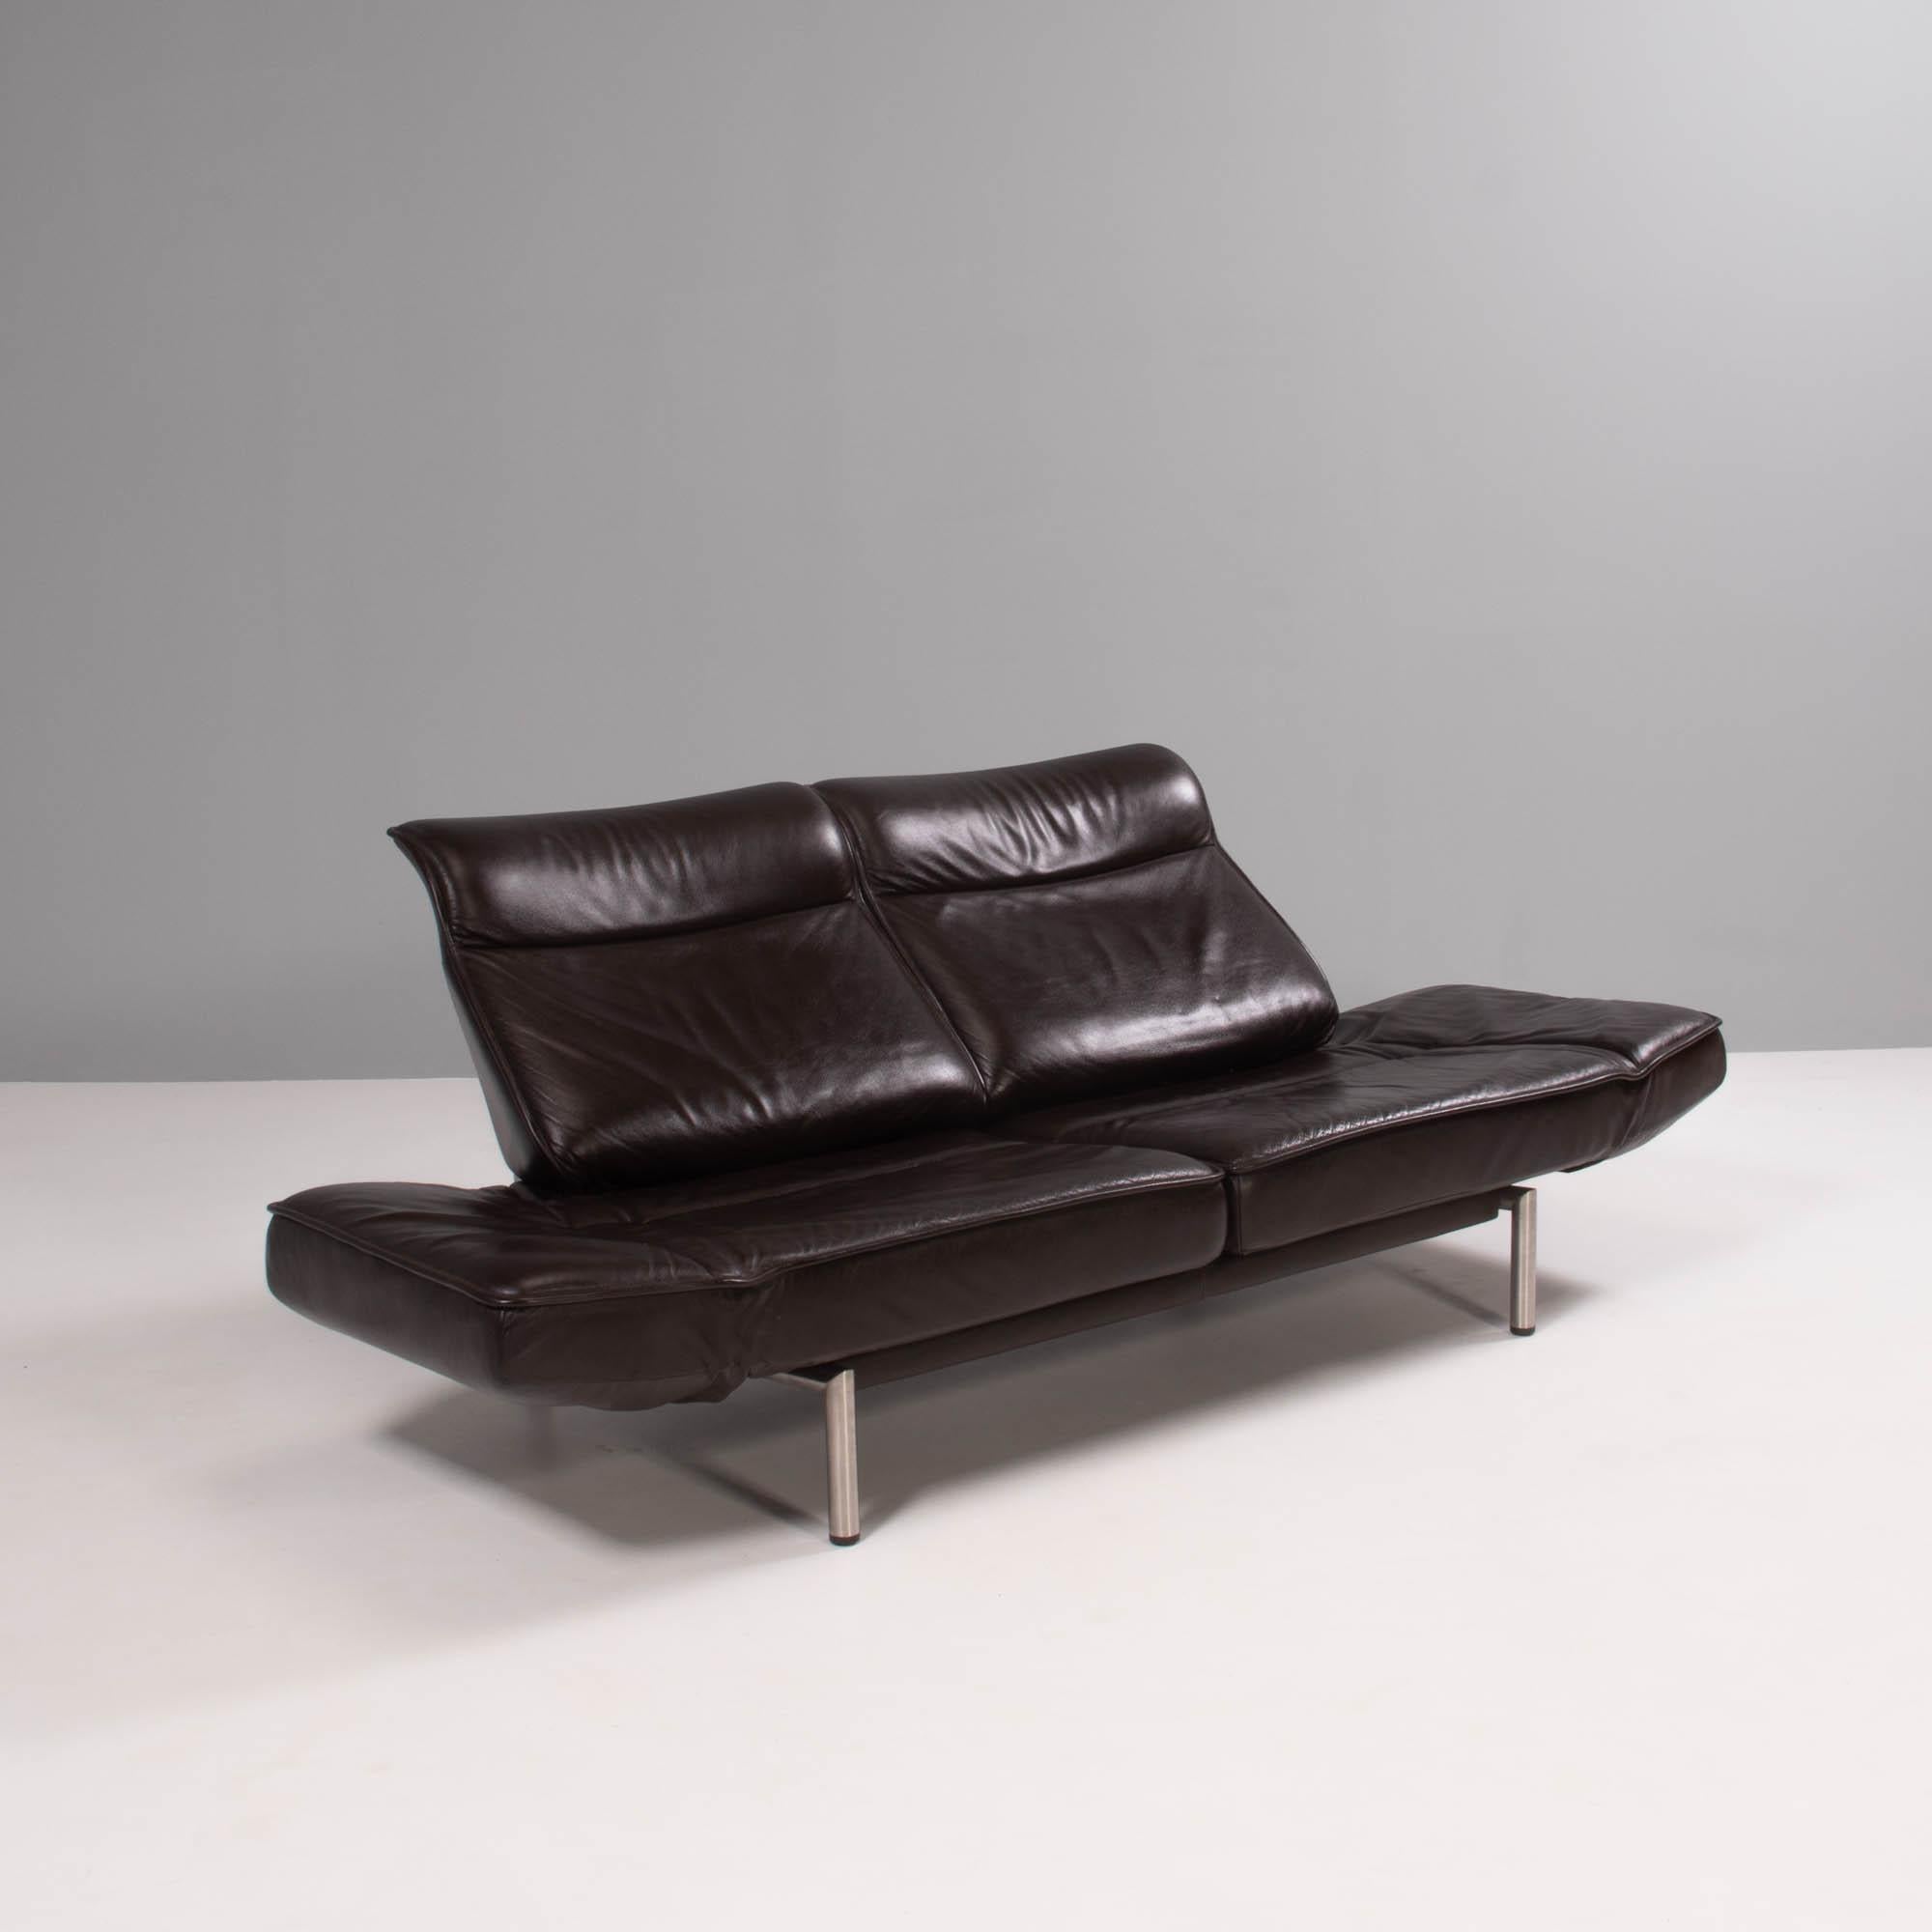 Originally designed by Reto Figg in 1985 the DS-450 has since been updated by Thomas Althaus. 

Constructed with chrome base and upholstered in dark brown leather, the sofa can be adapted into a variety of different seating arrangements.

The